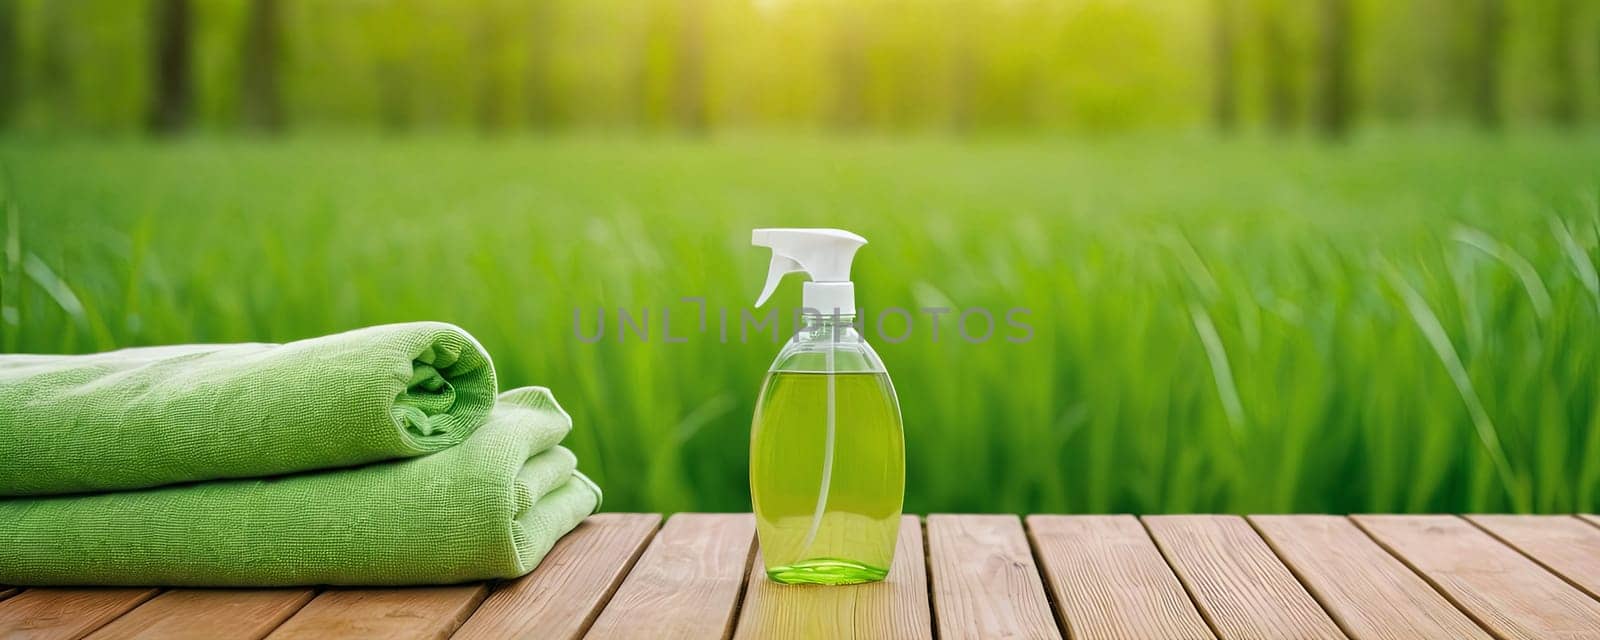 Cleaning products, outdoor, eco-friendly